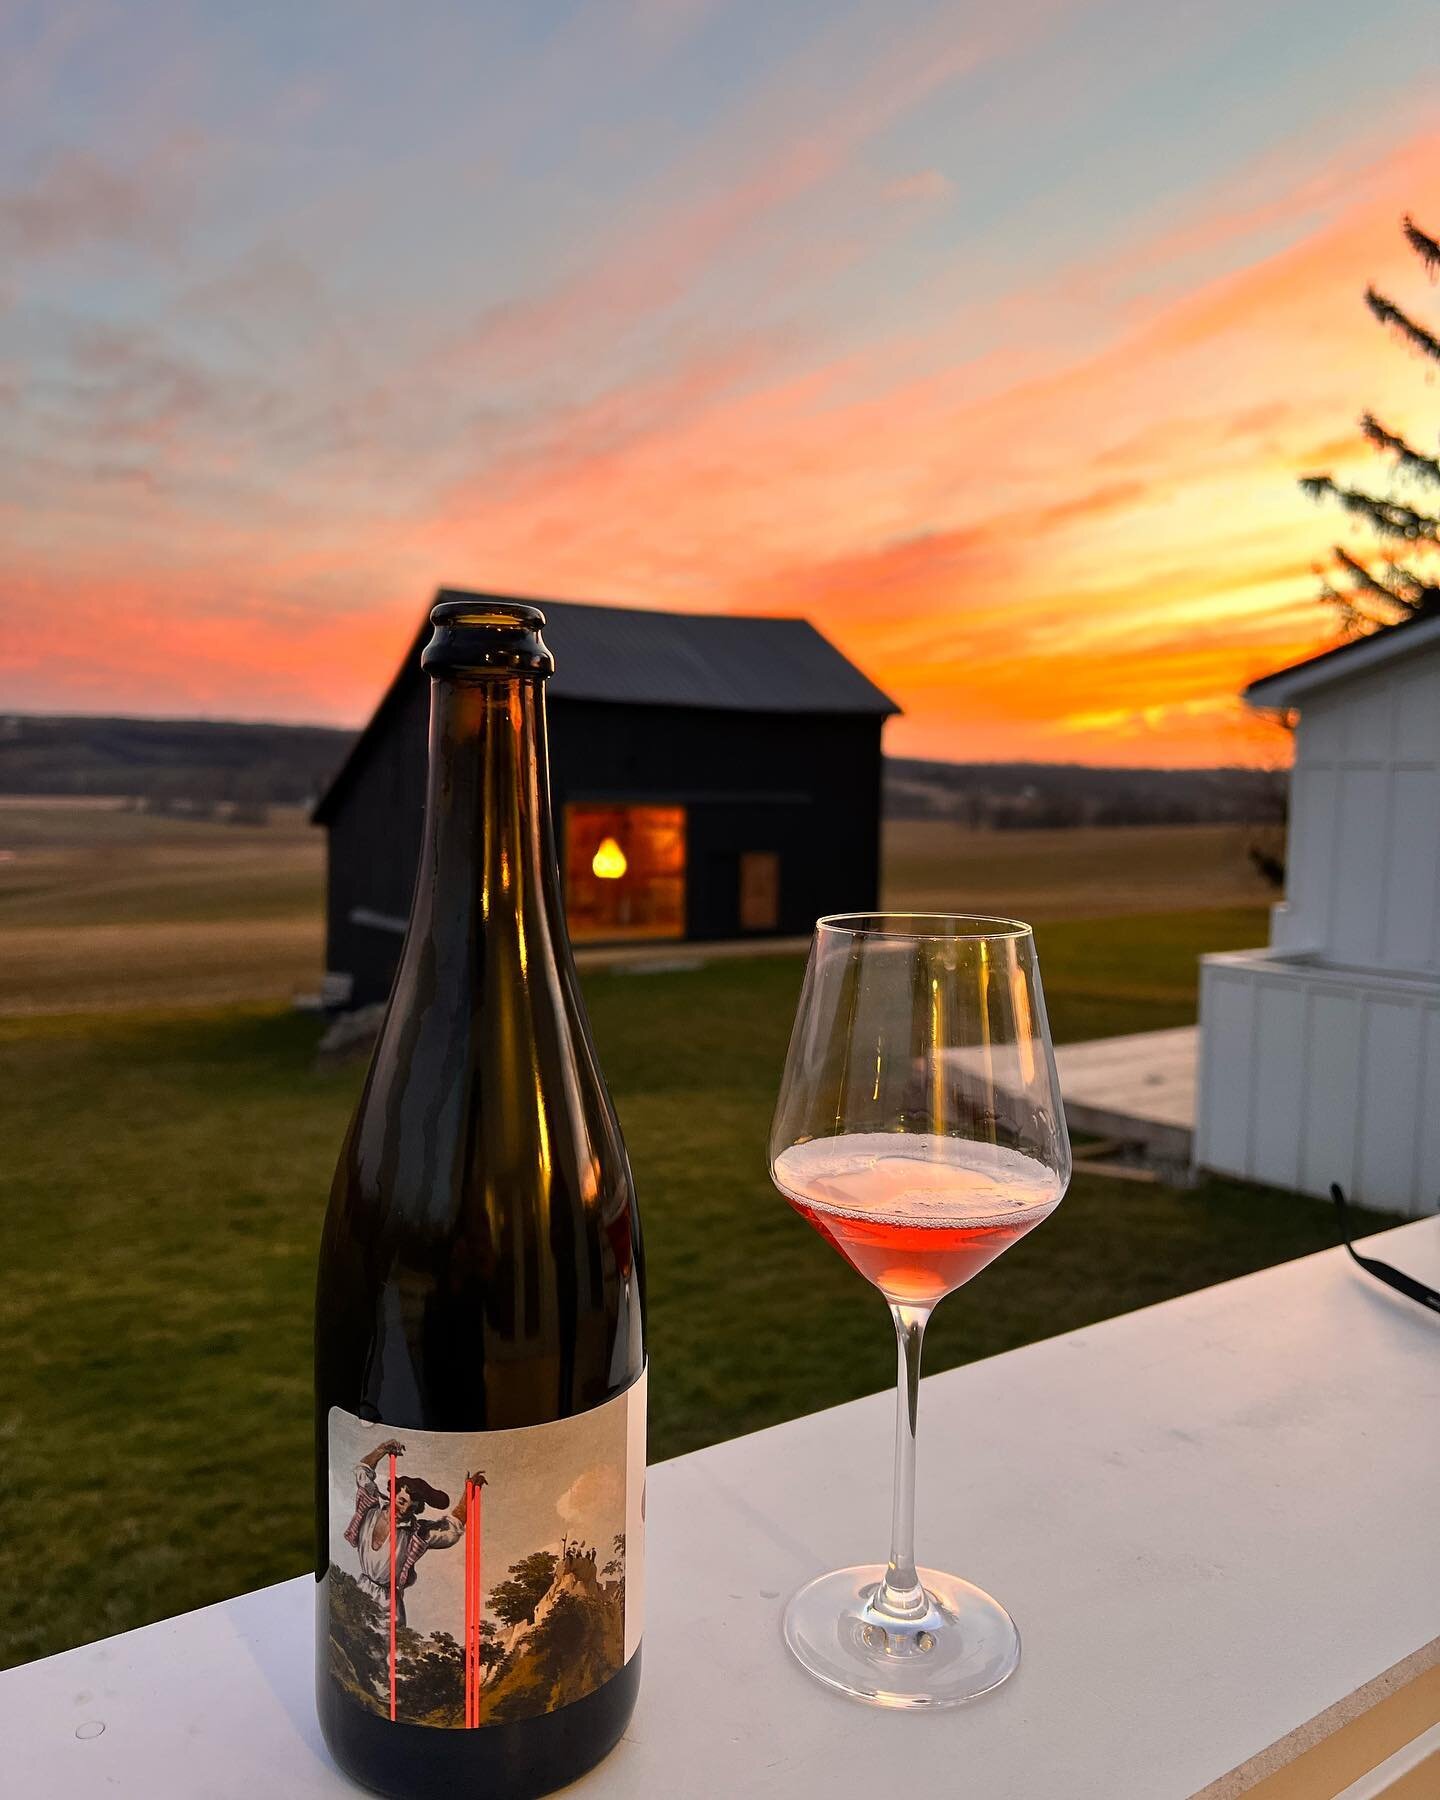 Come enjoy this view with me while sipping on a selection of my favorite ros&eacute;s for summer!!

I&rsquo;m hosting a Ros&eacute; Tasting and Pairing event at this beautiful farmhouse&hellip;Details below 👇🏼👇🏼 

Wednesday, June 21st
6:30-8:30pm